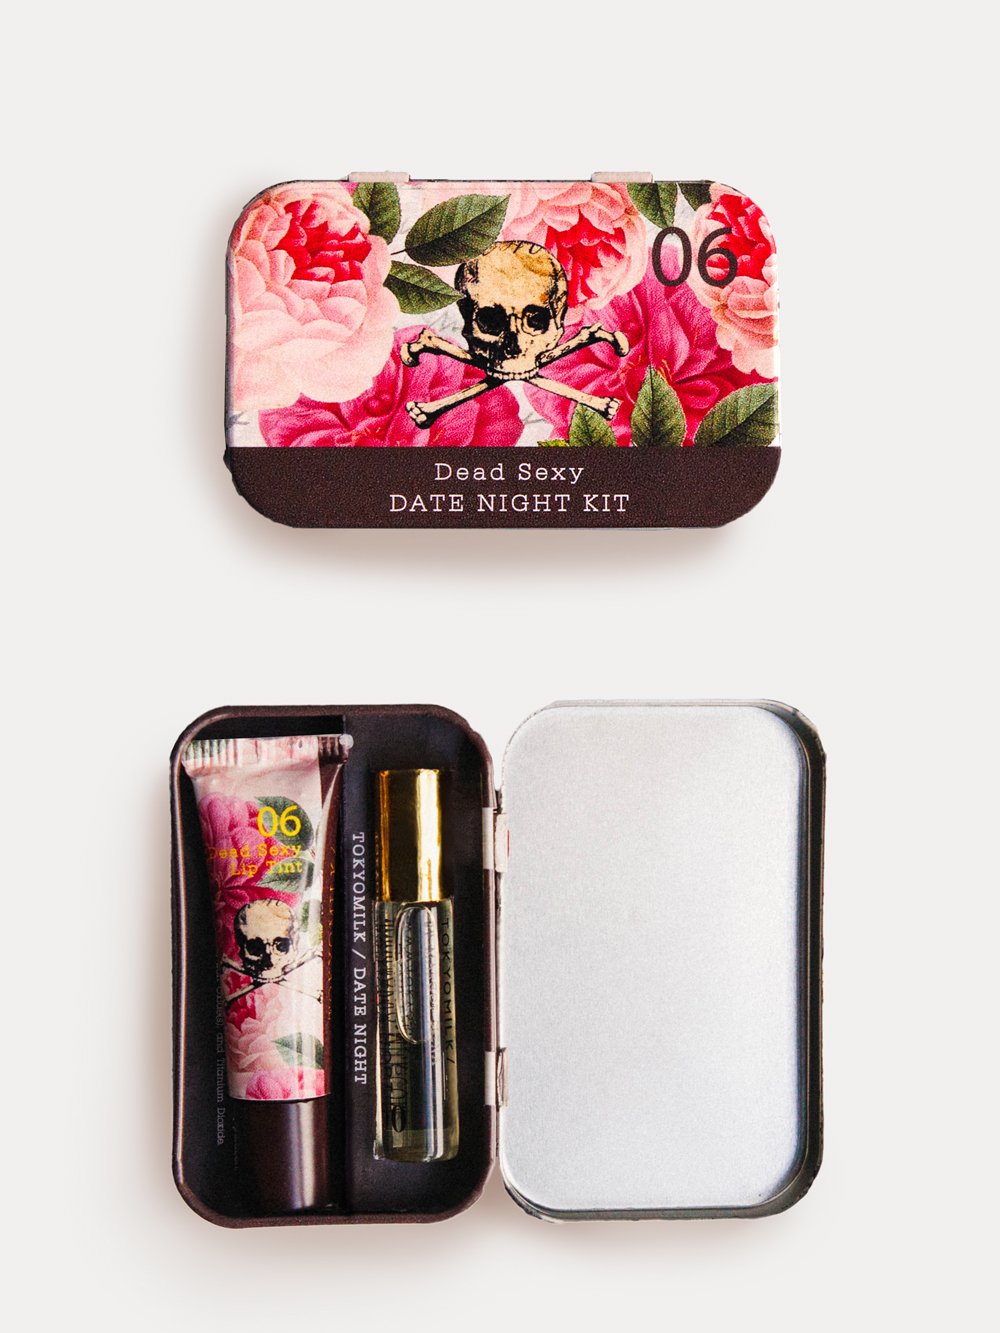 A "TokyoMilk Dead Sexy Date Night Tin Set" featuring a floral and skull design on the keepsake tin's cover. The open tin contains a rollerball parfum, breath spray, and lip tint from Margot Elena.